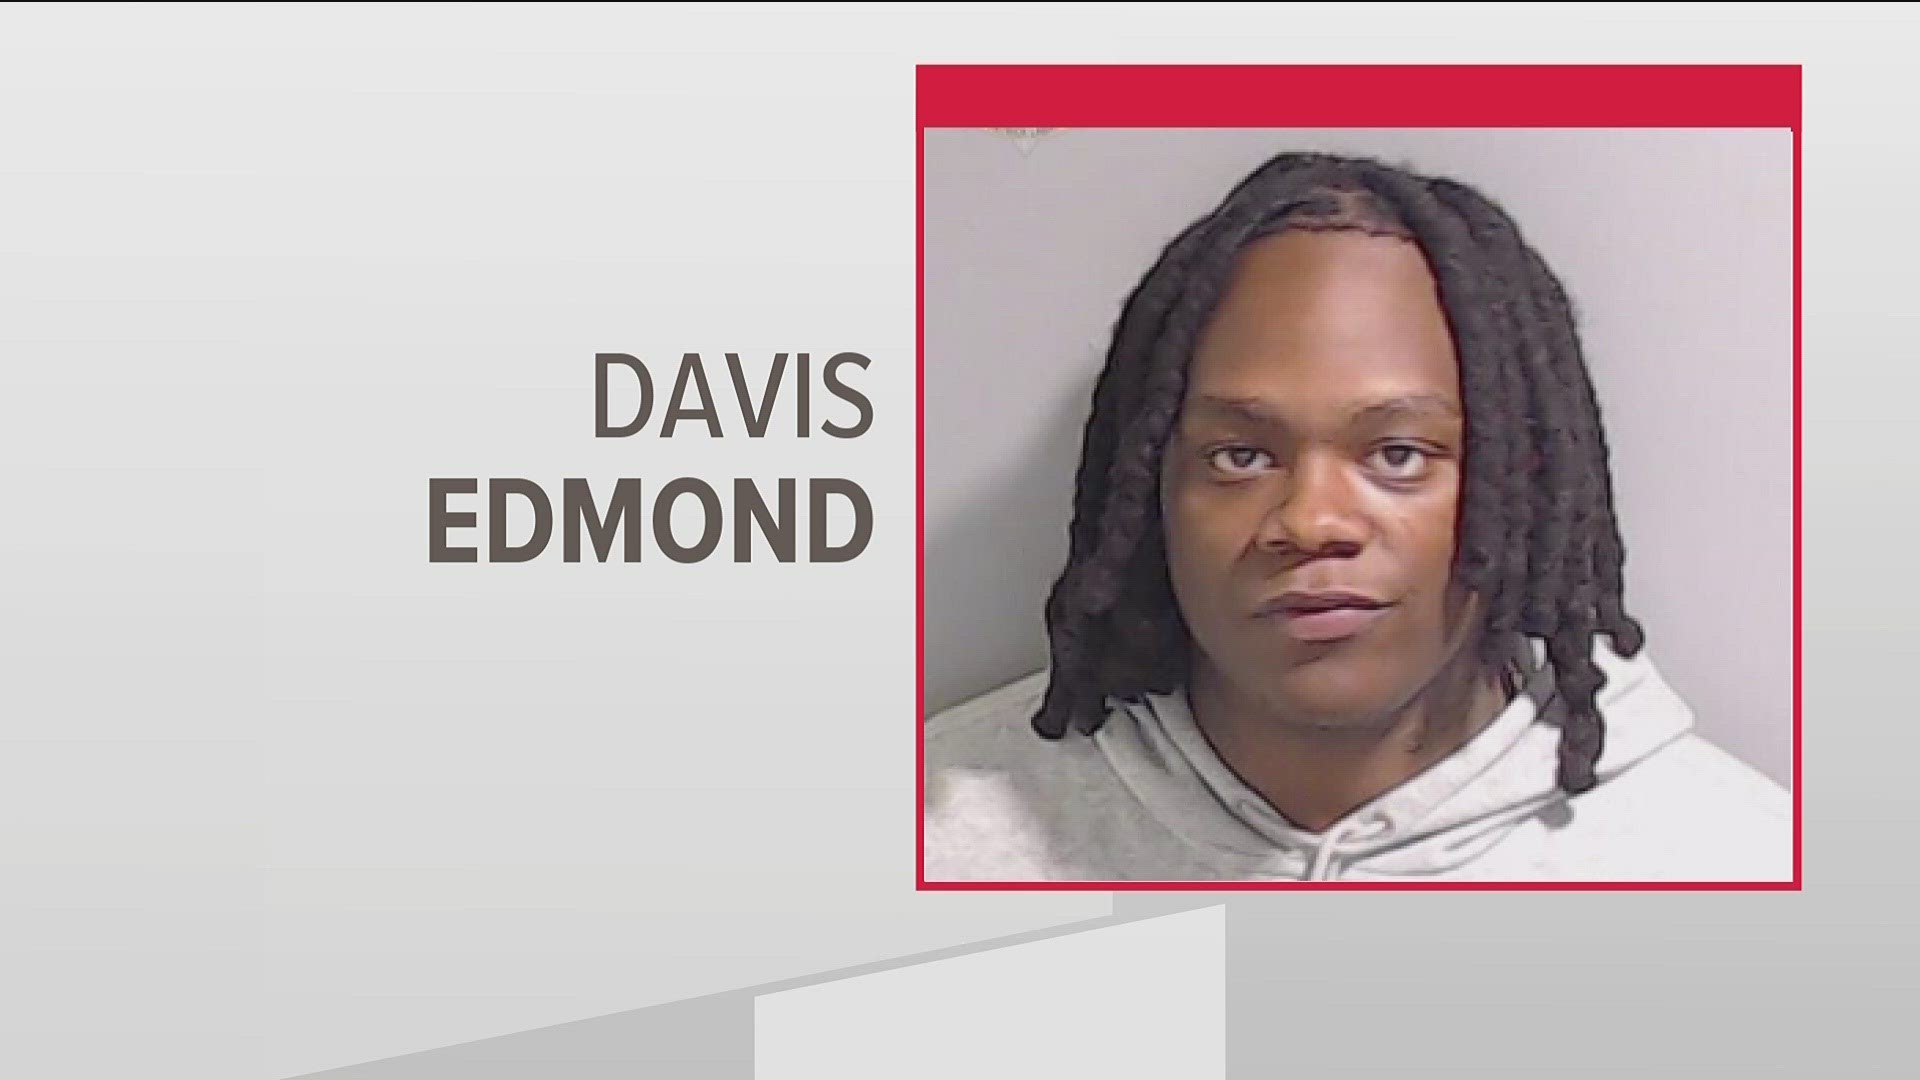 The warrants indicate that Davis Edmond of Ellenwood was a driver in the incident.